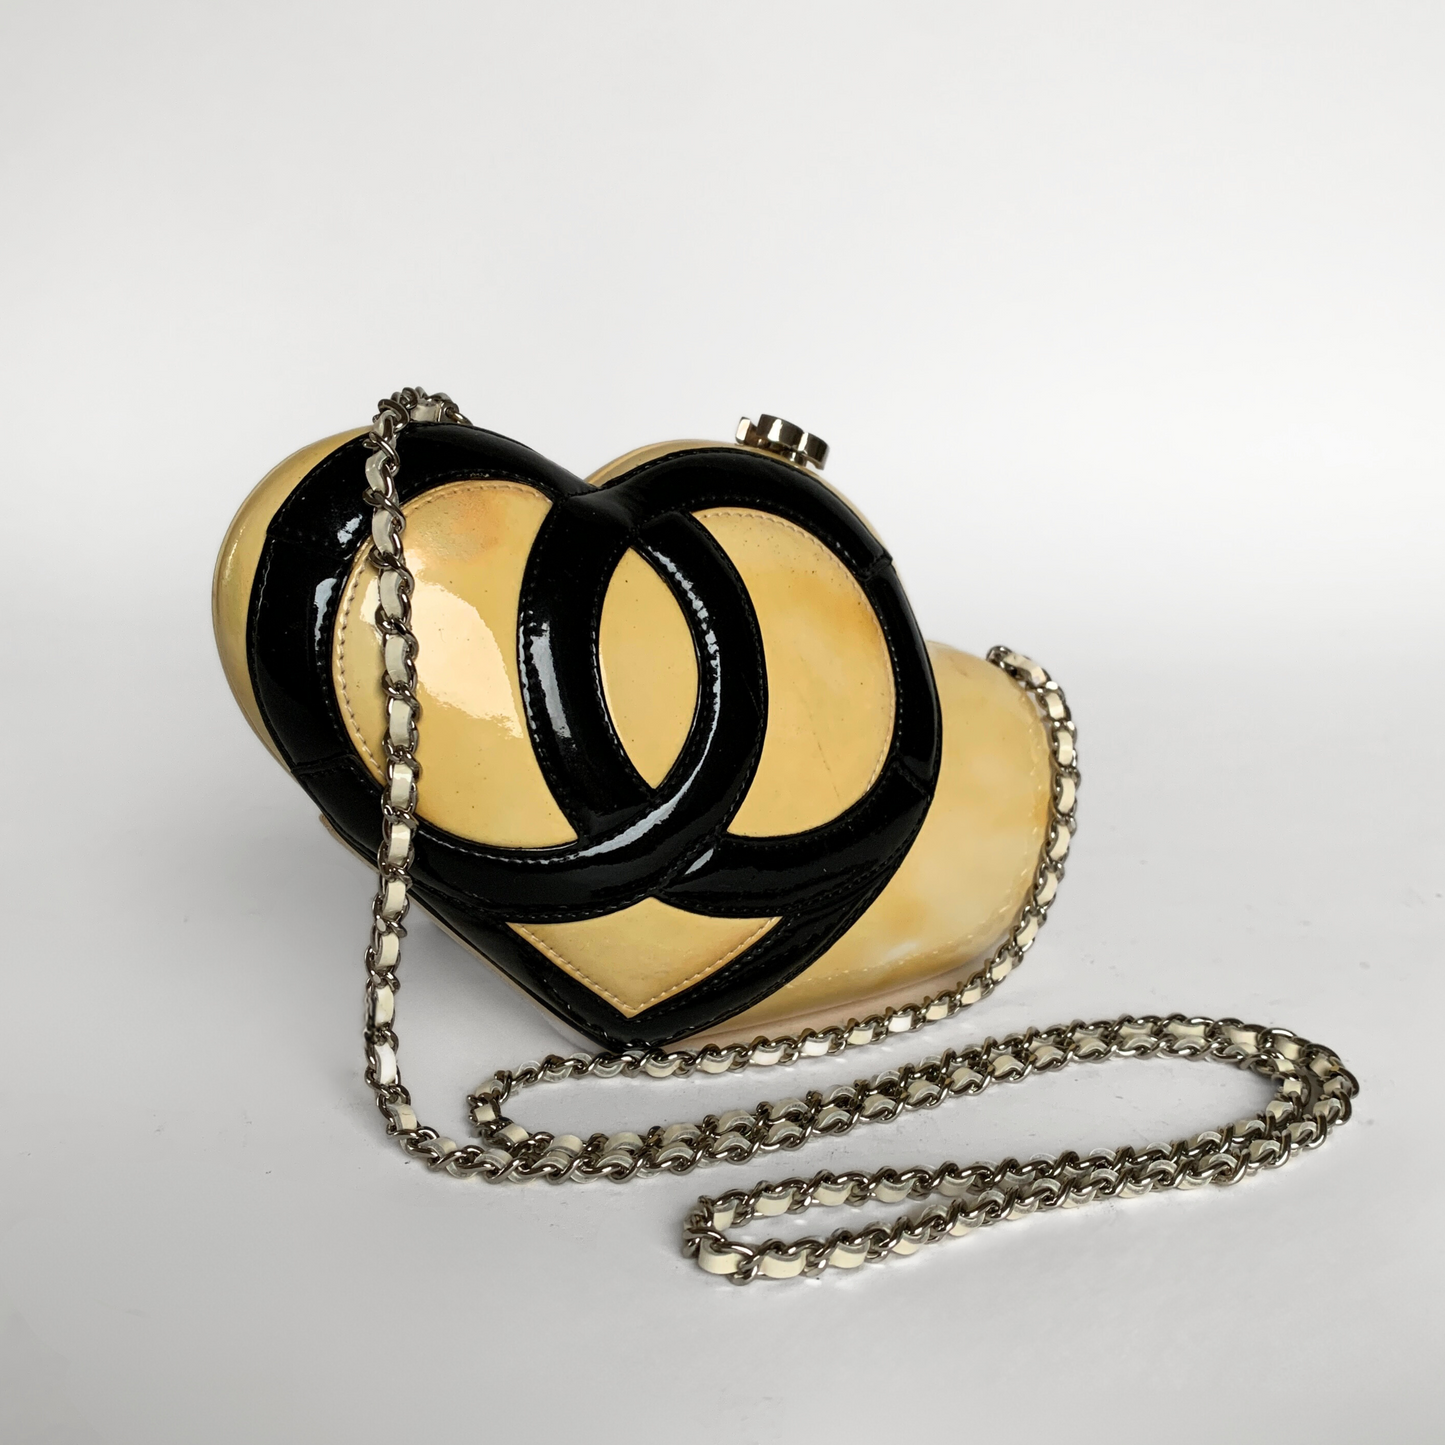 Chanel Heart Shoulder Bag Patent Leather (Limited Edition)